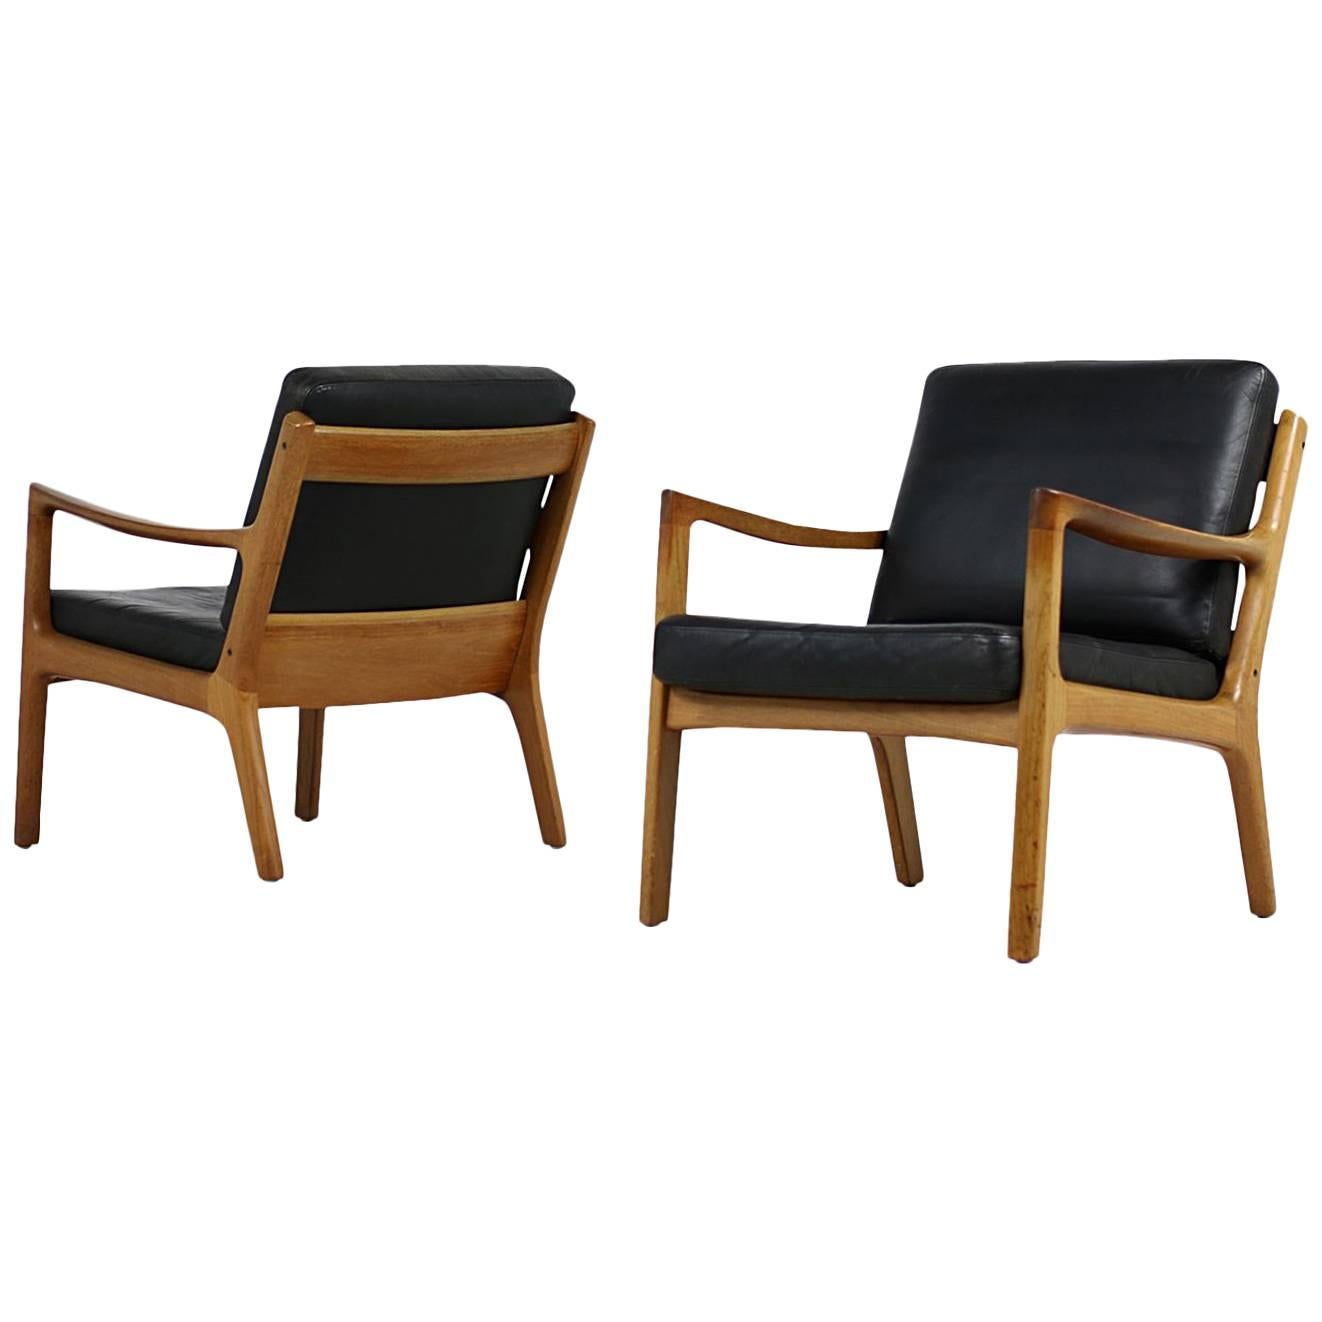 Pair of 1960s, Danish Vintage Lounge Chairs Ole Wanscher Teak and Black Leather